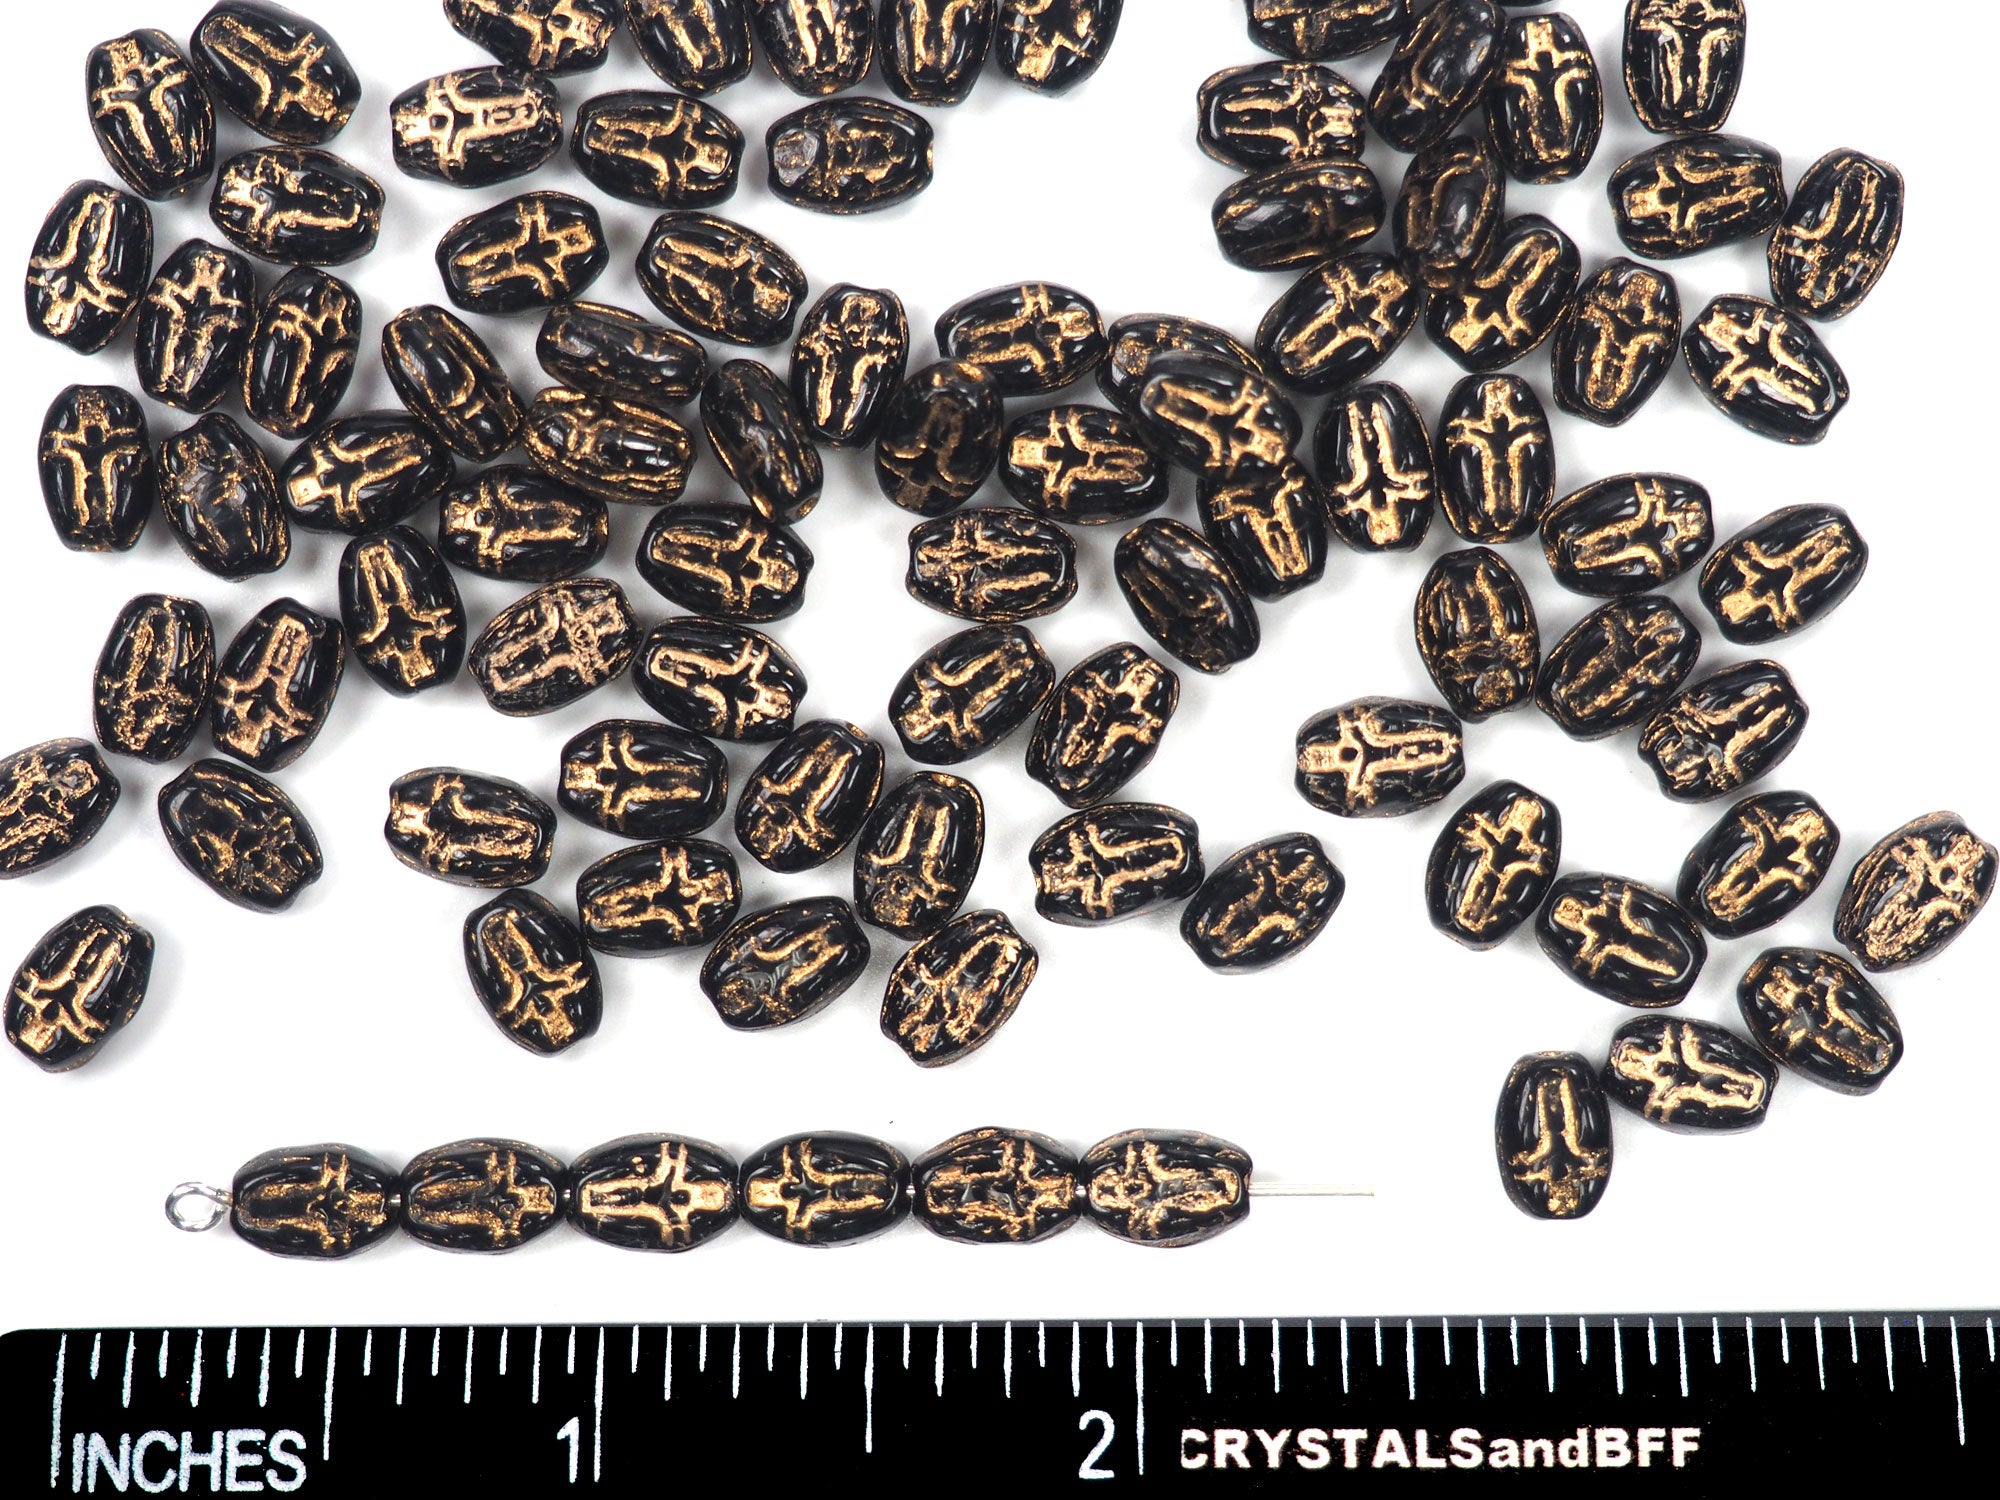 Czech Glass Druk Beads in size 8x5mm, Jet Black color with Gold Painted Cross, 40pcs, P901